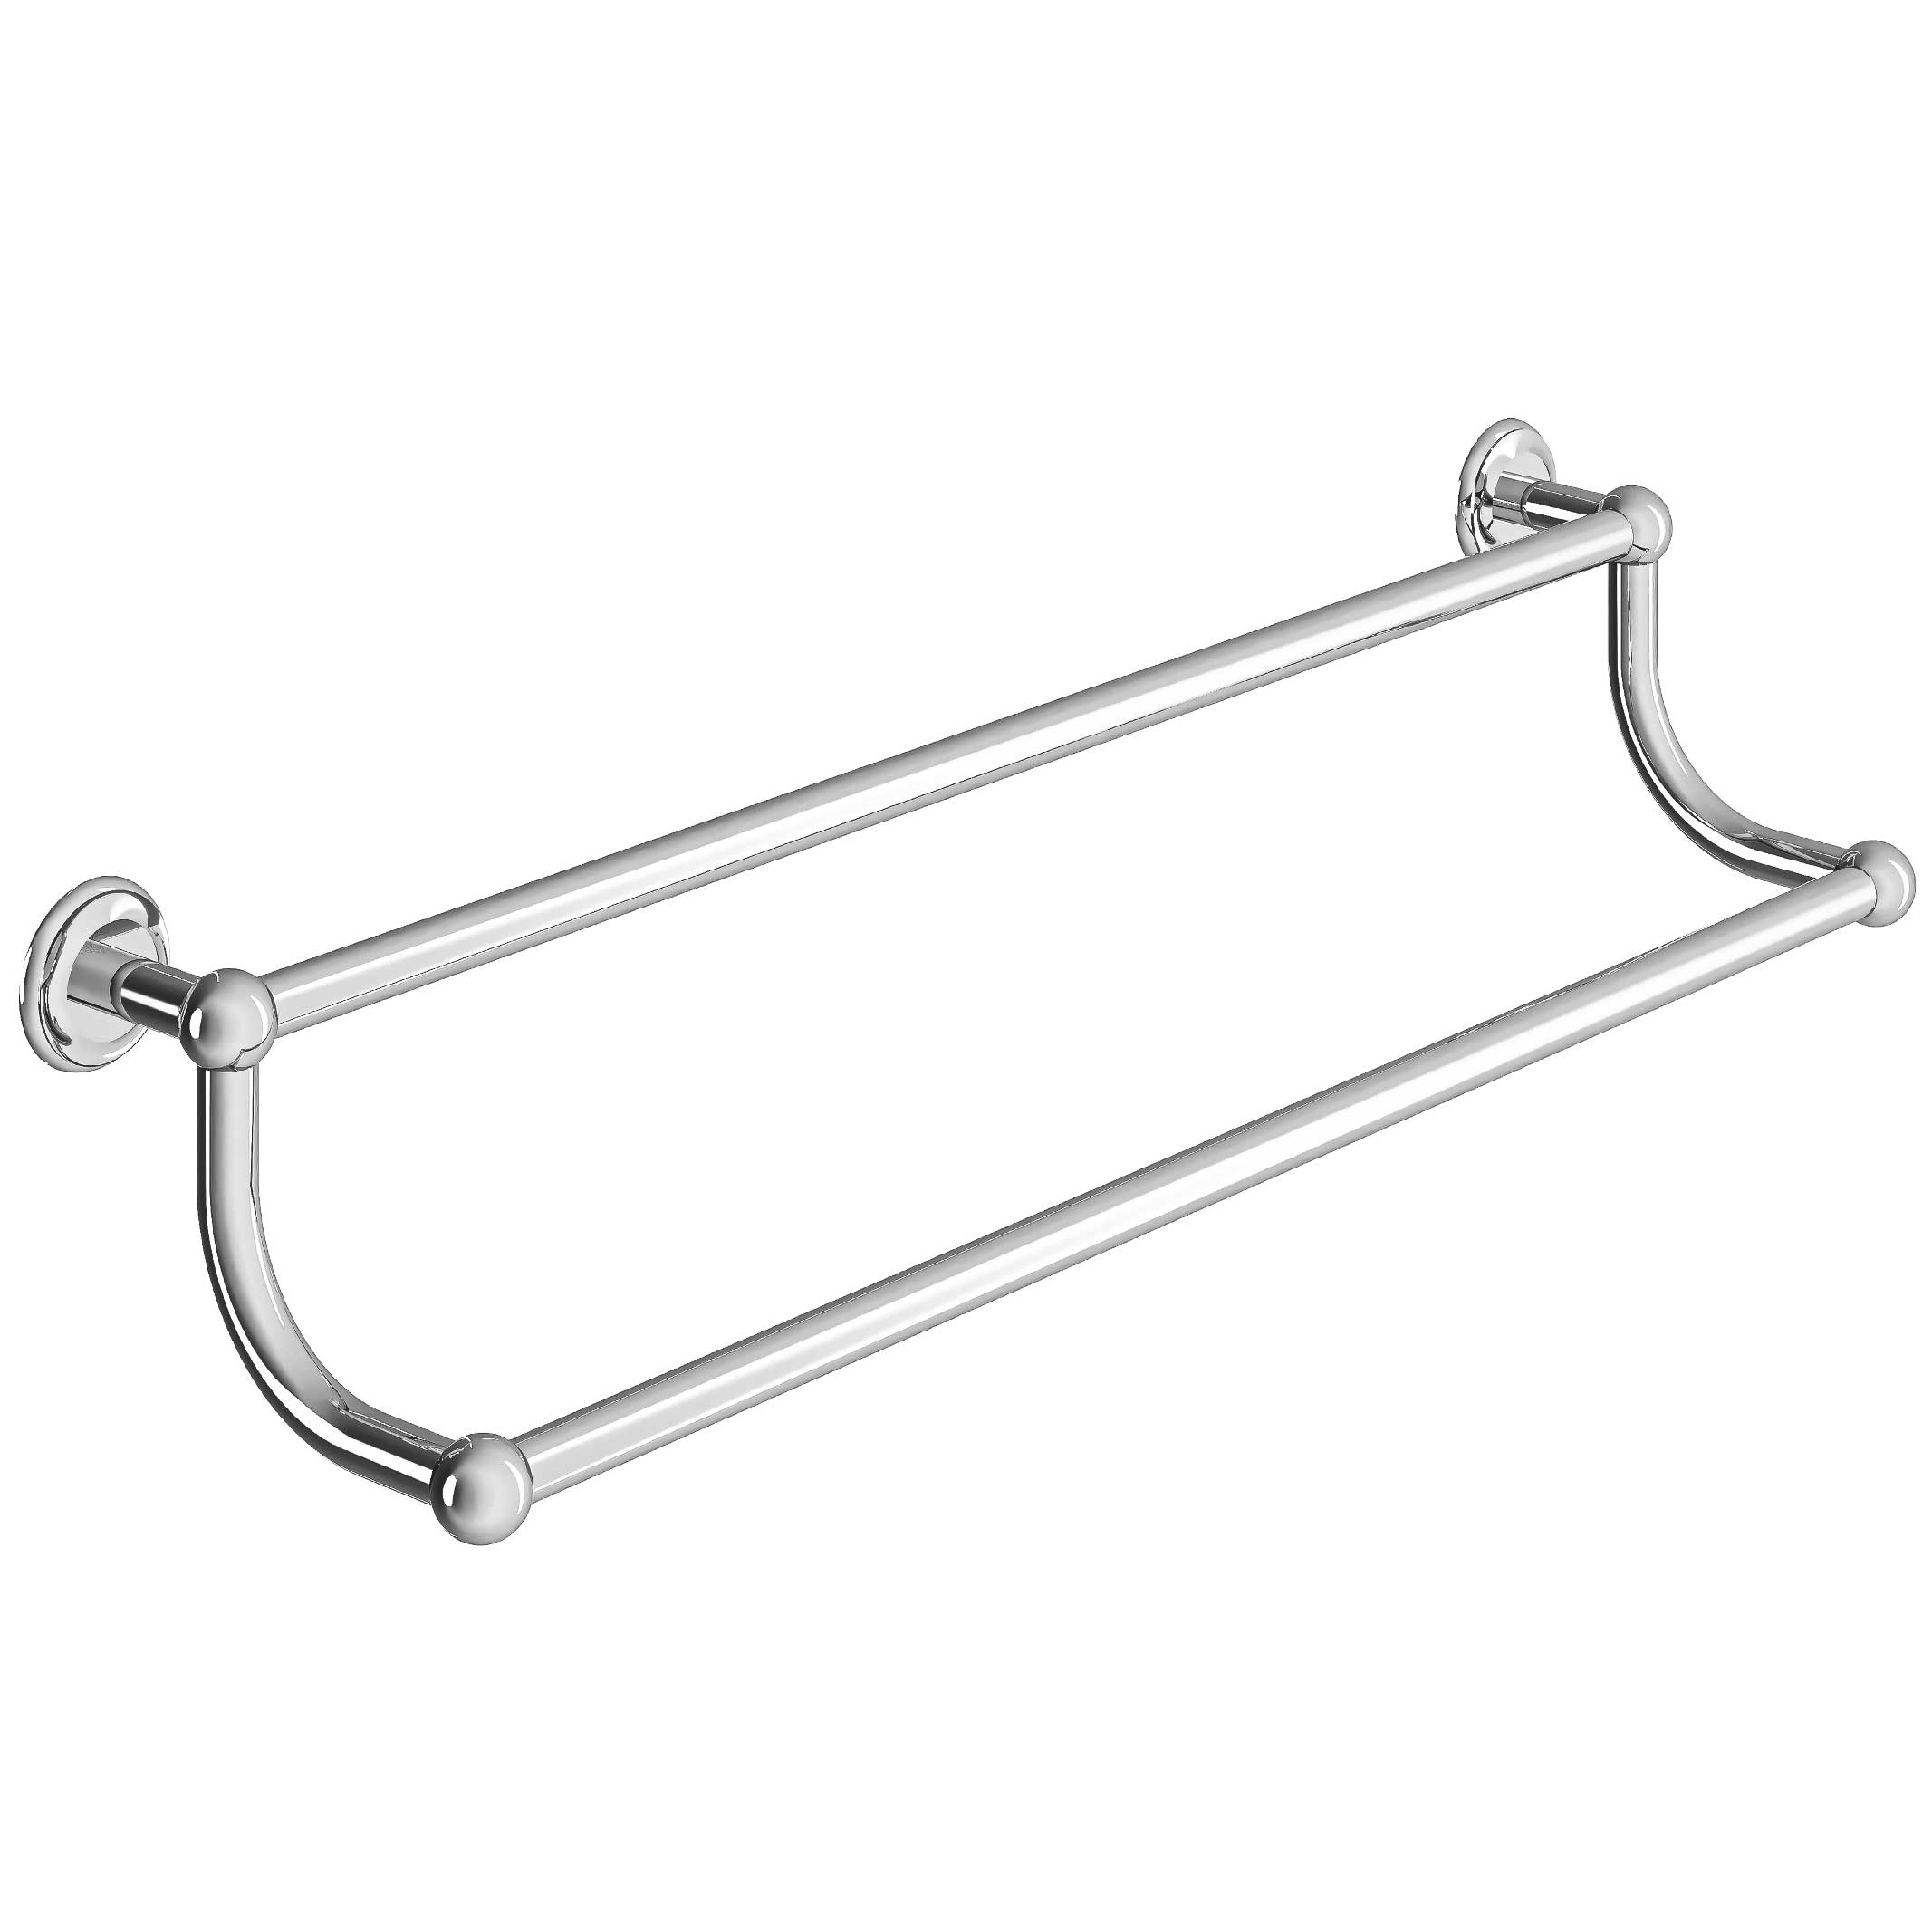 M40-509 Wall mounted double towel bar